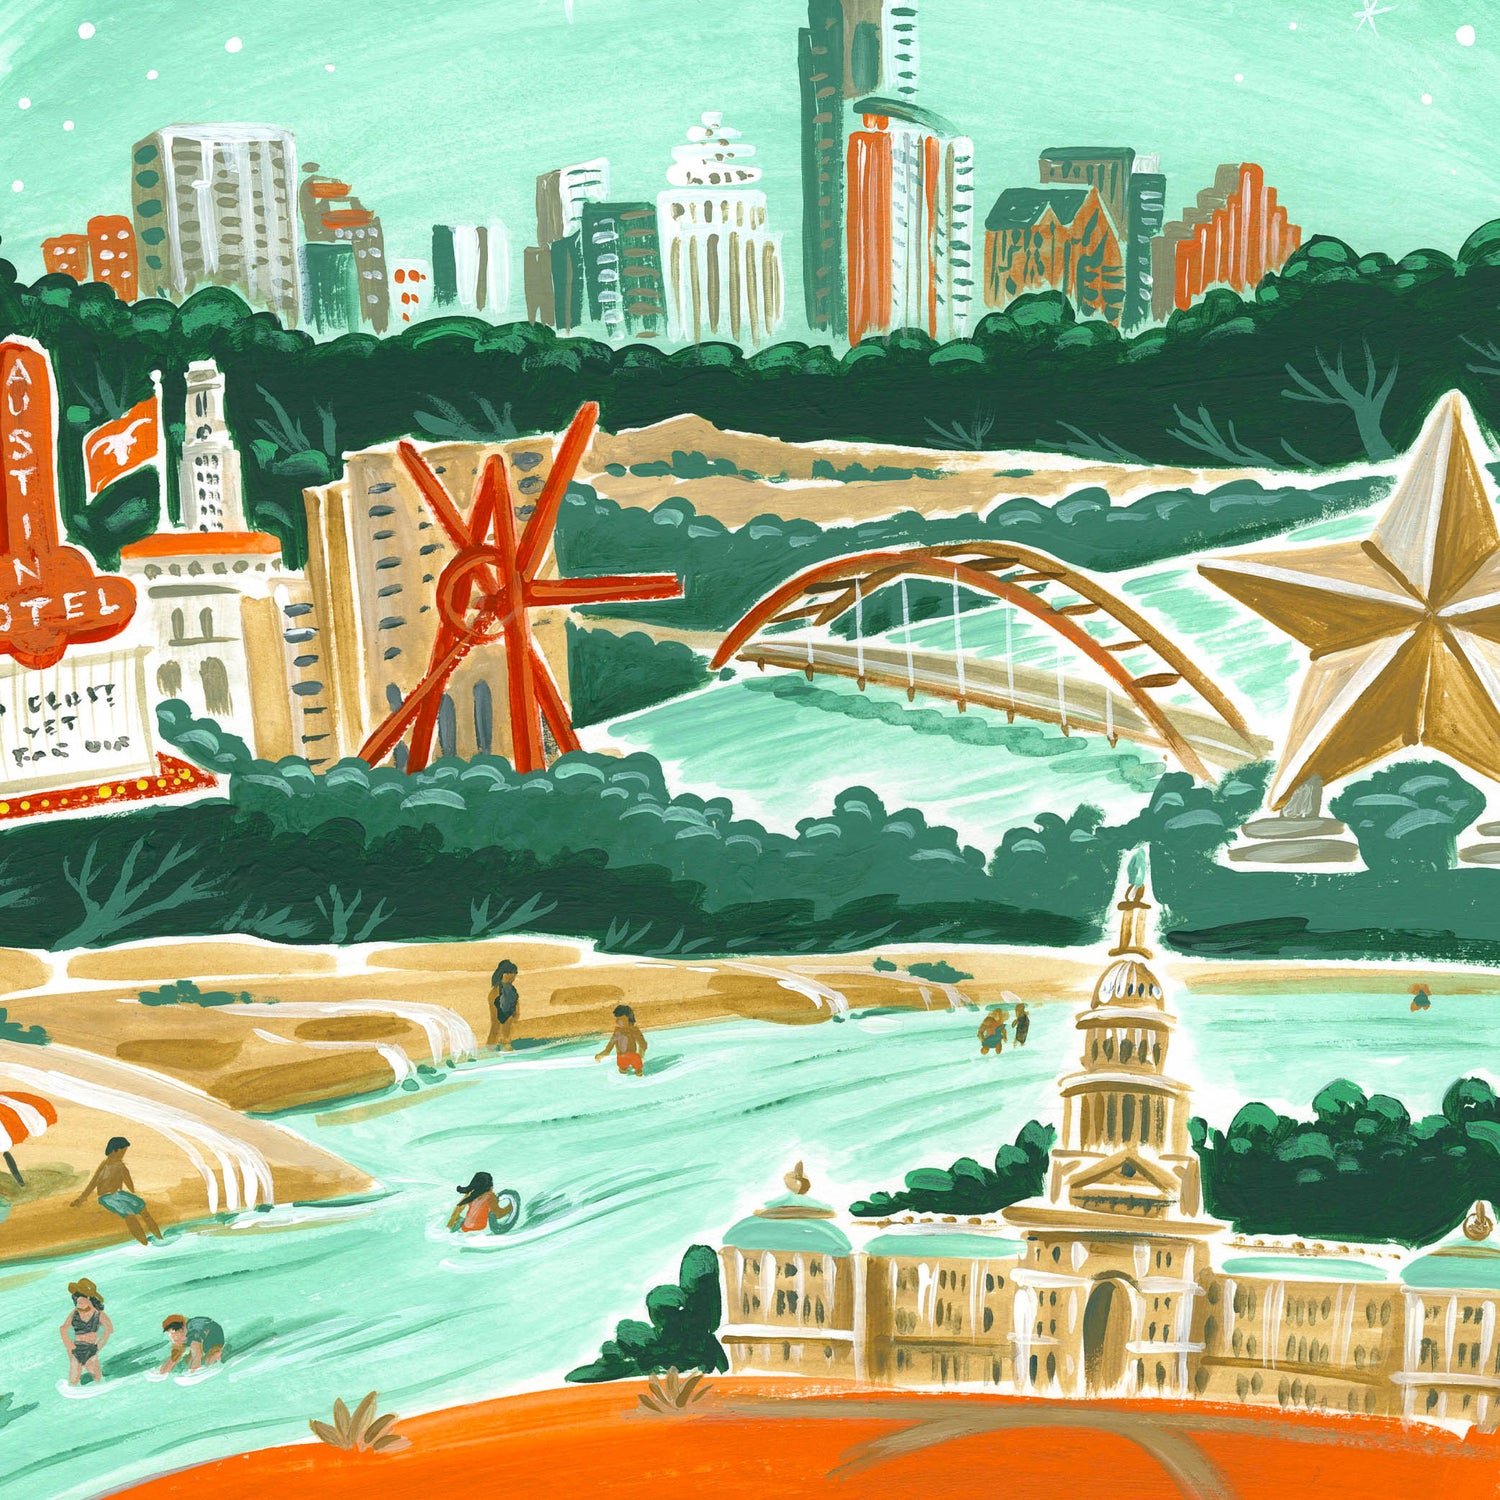 Downtown Austin skyline detail with famous Austin Motel, Austin Star Statue, and Clock Knot Statue; illustration by Angela Staehling